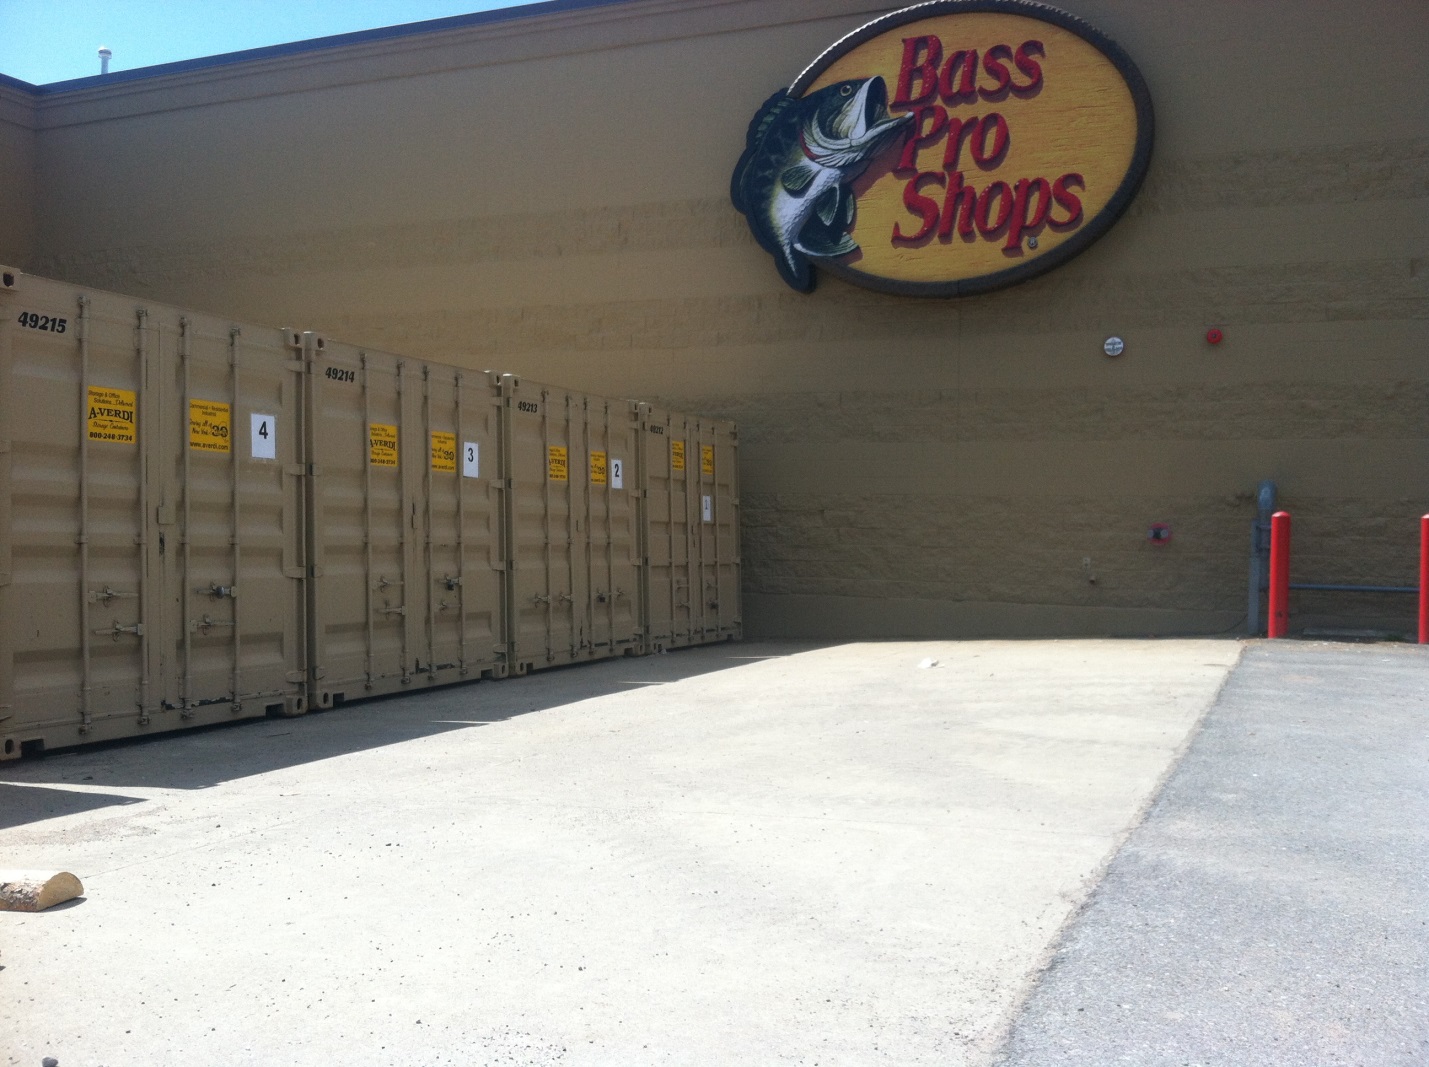 Bass pro 1 and feature